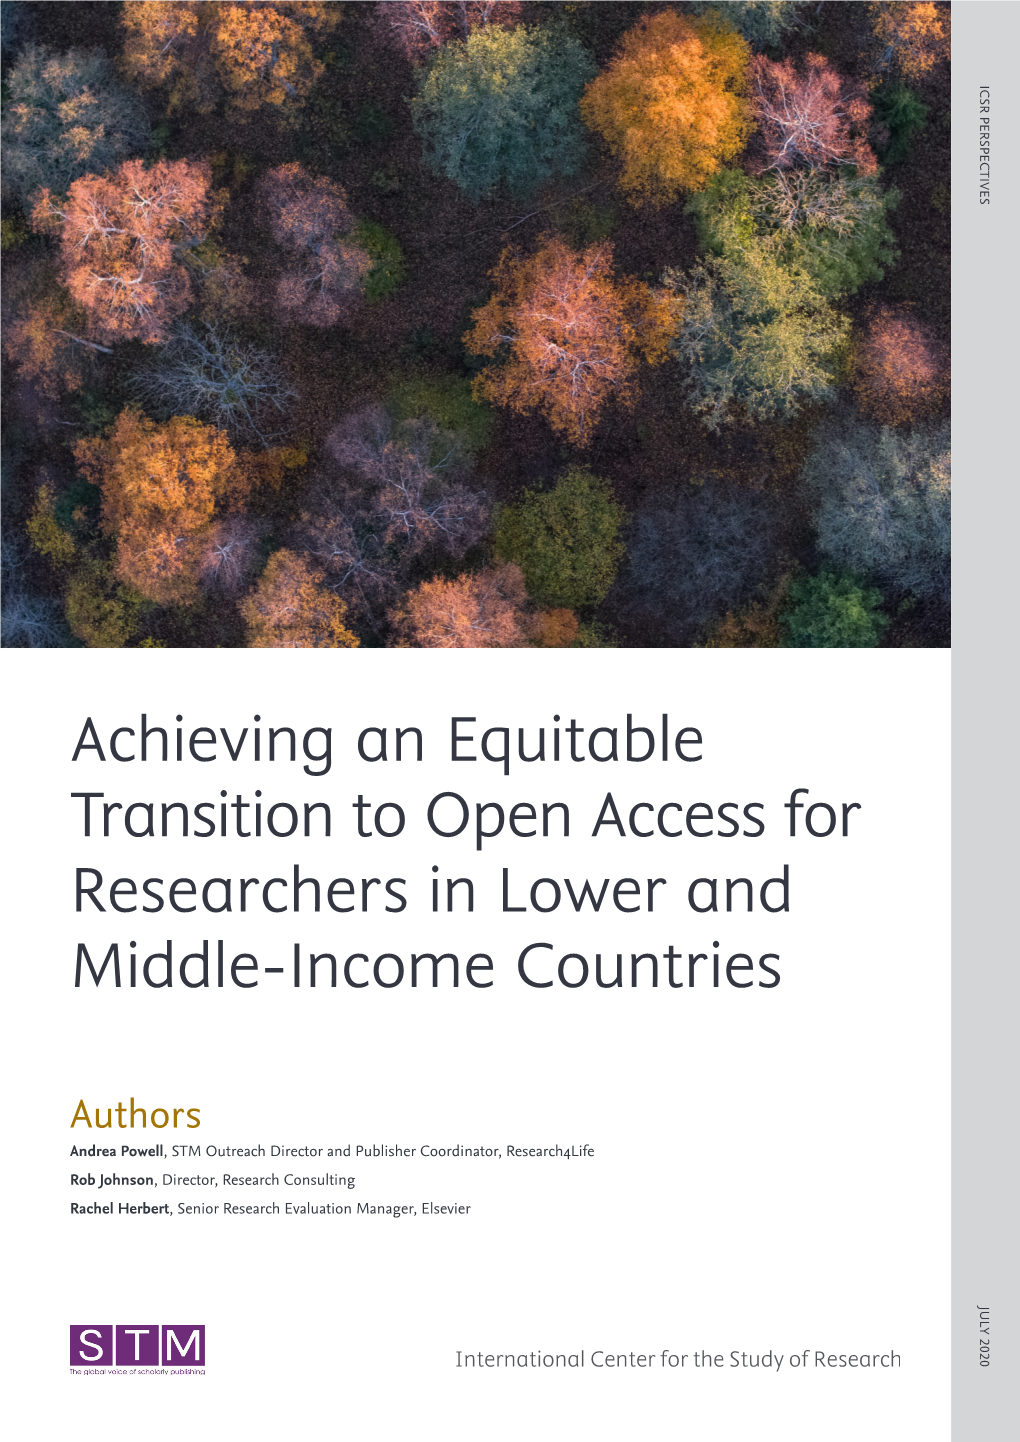 Achieving an Equitable Transition to Open Access for Researchers in Lower and Middle-Income Countries